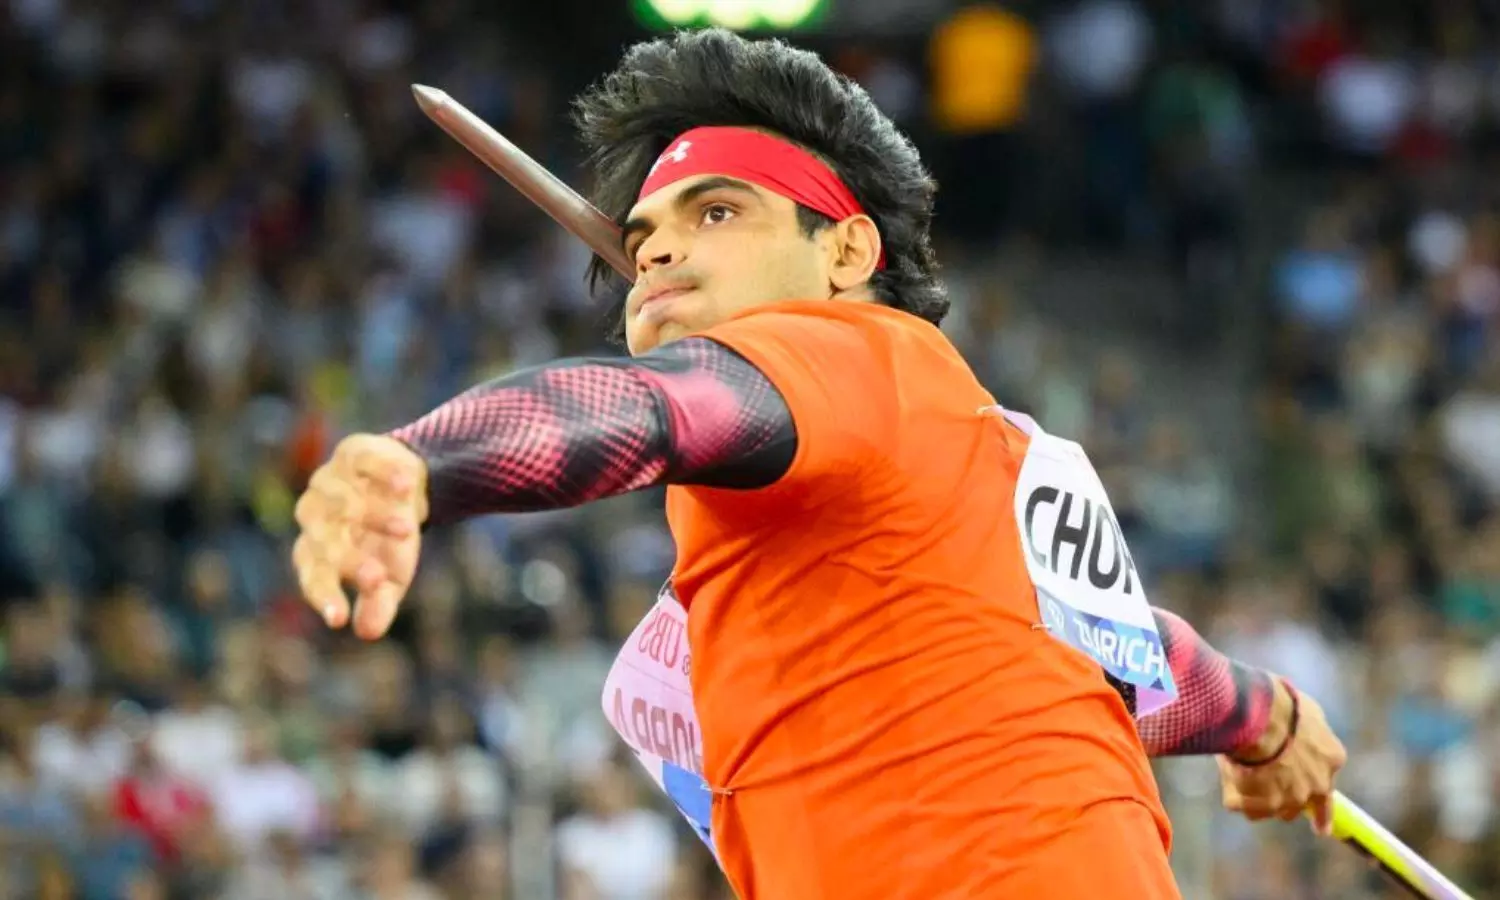 India's greatest wins in 2022 | From Neeraj Chopra's Diamond League win to Thomas Cup citory